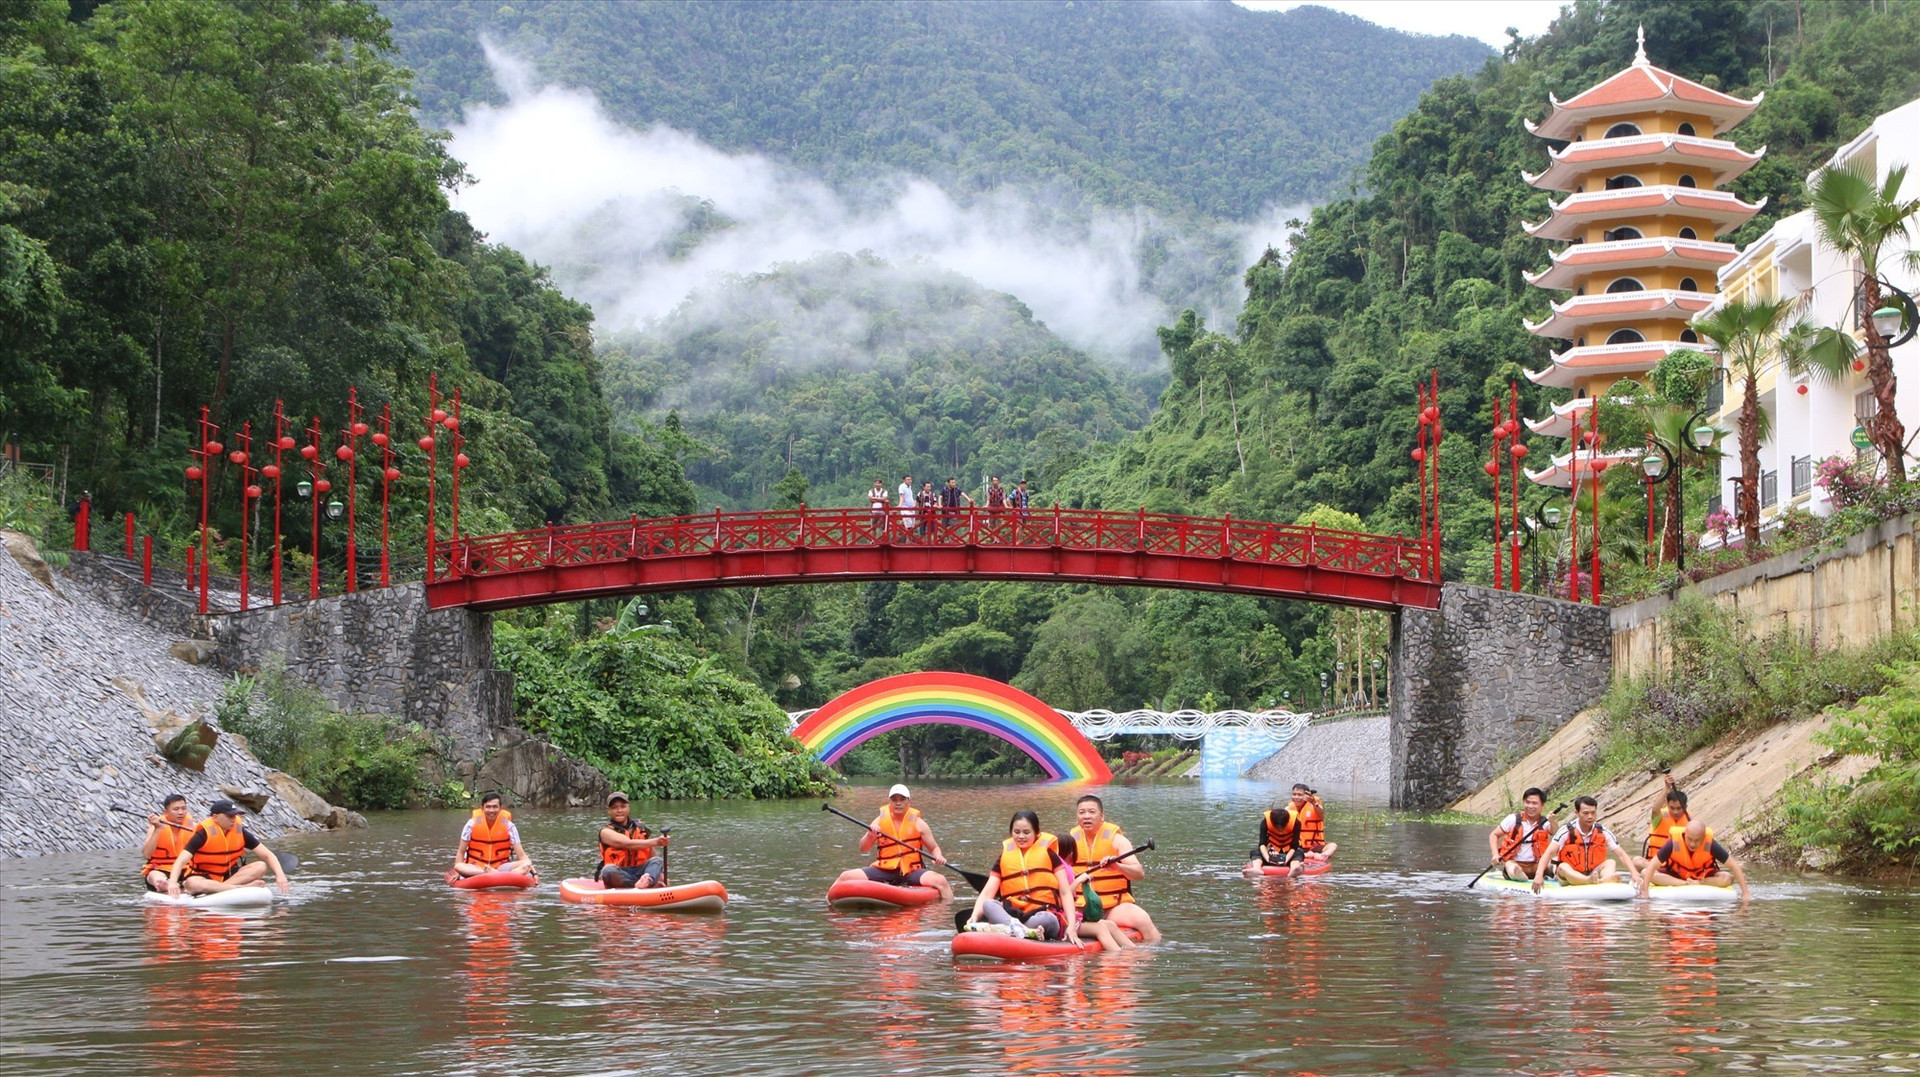 Visitors’ rowing in Dong Giang Heaven Gate ecotourism site